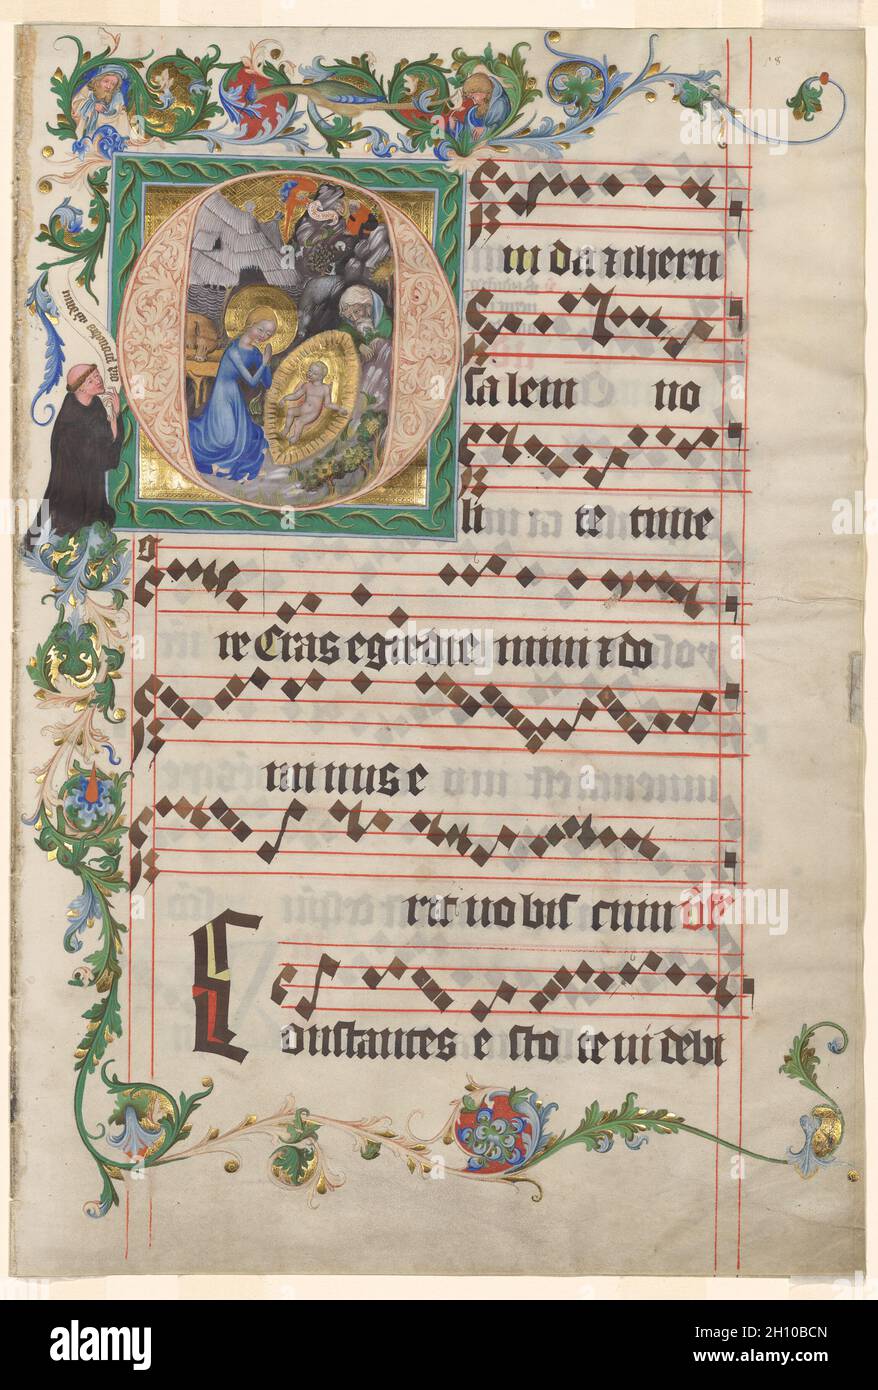 Bifolio from an Antiphonary: Historiated Initial O with the Nativity, early 1400s. Bohemia, Prague, 15th century. Ink, tempera, and gold on parchment; sheet: 56.8 x 38.9 cm (22 3/8 x 15 5/16 in.); framed: 61.6 x 76.8 cm (24 1/4 x 30 1/4 in.); matted: 71.1 x 55.9 cm (28 x 22 in.).  This splendid bifolium (a sheet folded in half to form two leaves) once formed part of an important antiphonary produced for an unidentified Benedictine monastery in Bohemia. With its rich illumination, it provides an important example of Bohemian painting during the opening years of the 15th century as well as paint Stock Photo